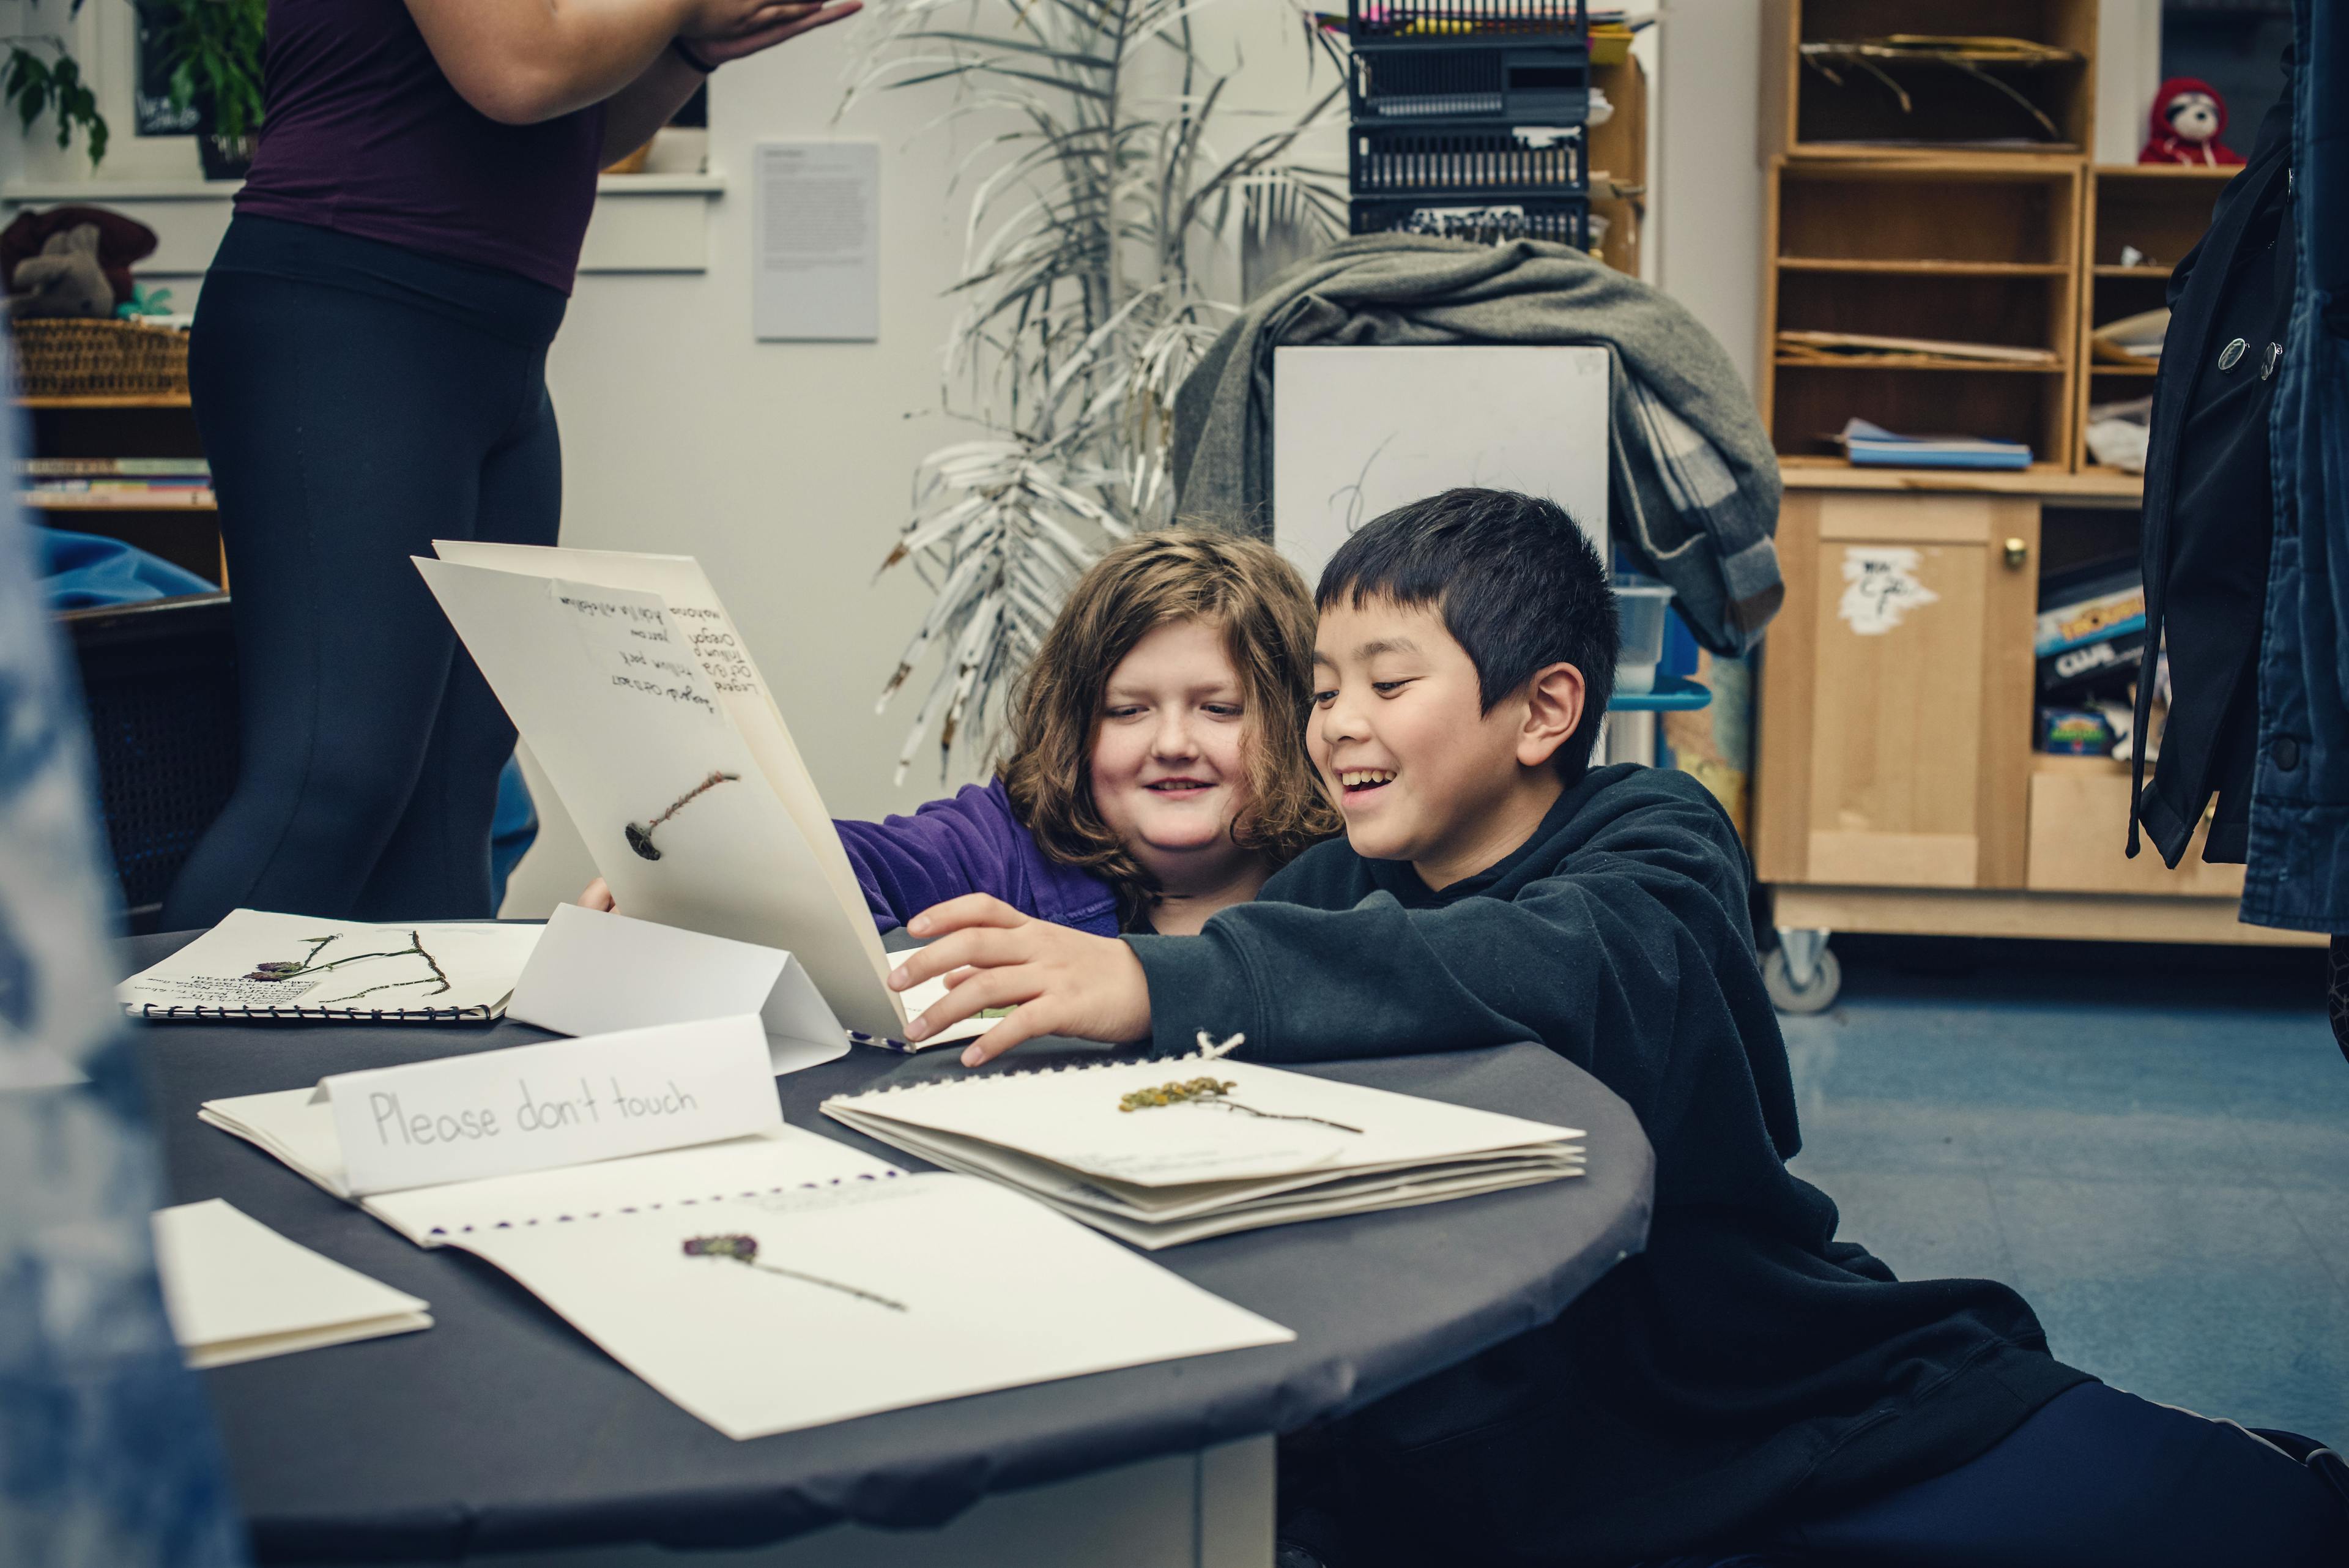 Two smiling children in a classroom looking at a handmade herbarium book. Other herbarium books surround them on the table.   